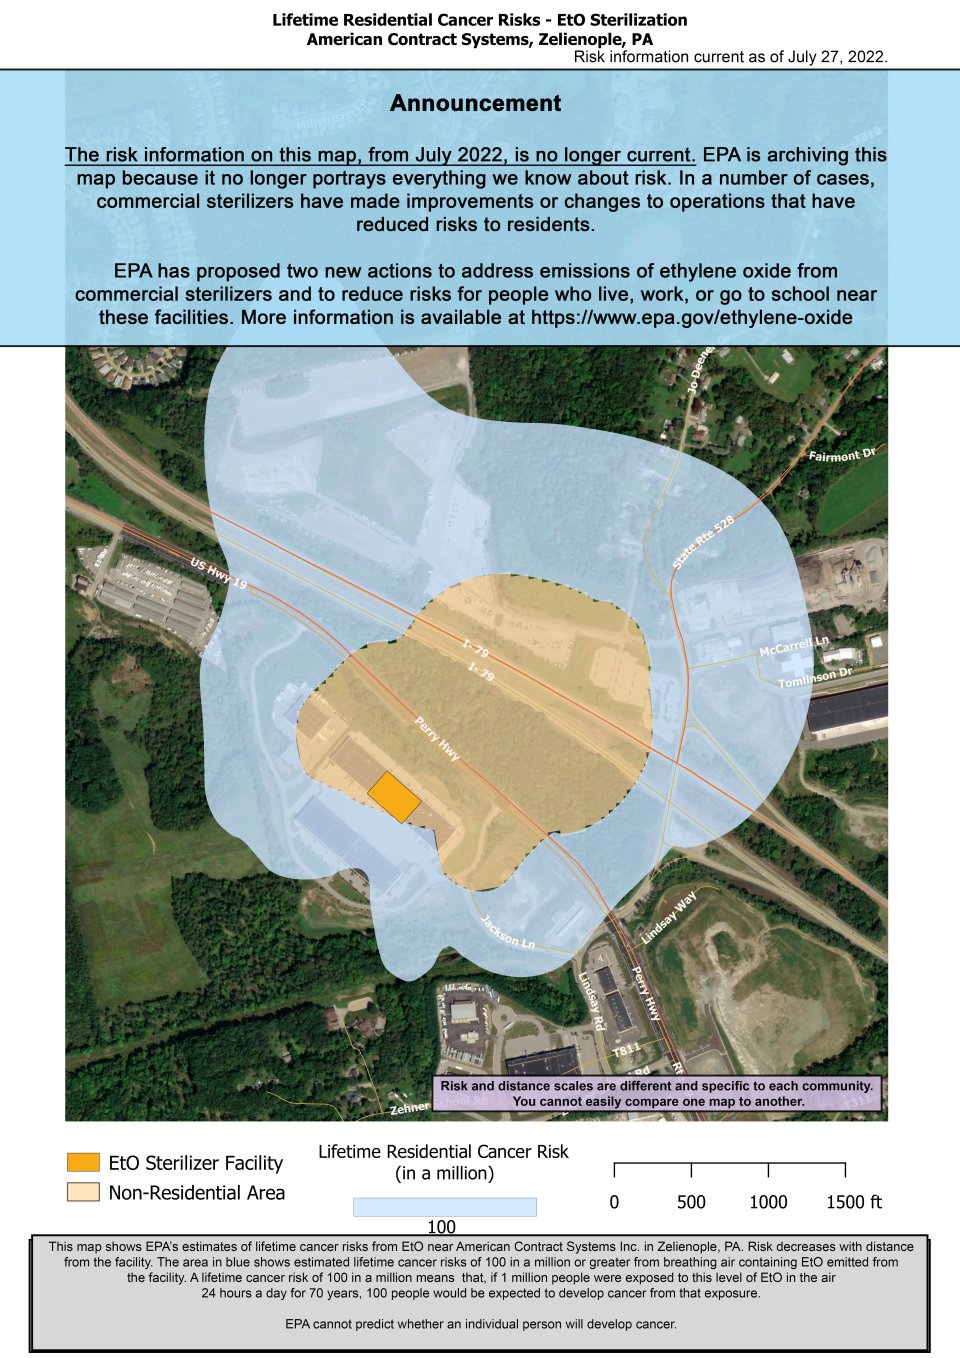 This map shows EPA’s estimate of lifetime cancer risks from breathing ethylene oxide near American Contract Systems, 4040 Jacksons Pointe C, Zelienople, PA. Estimated cancer risk decreases with distance from the facility. Nearest the facility, the estimated lifetime cancer risk is 100 in a million. 